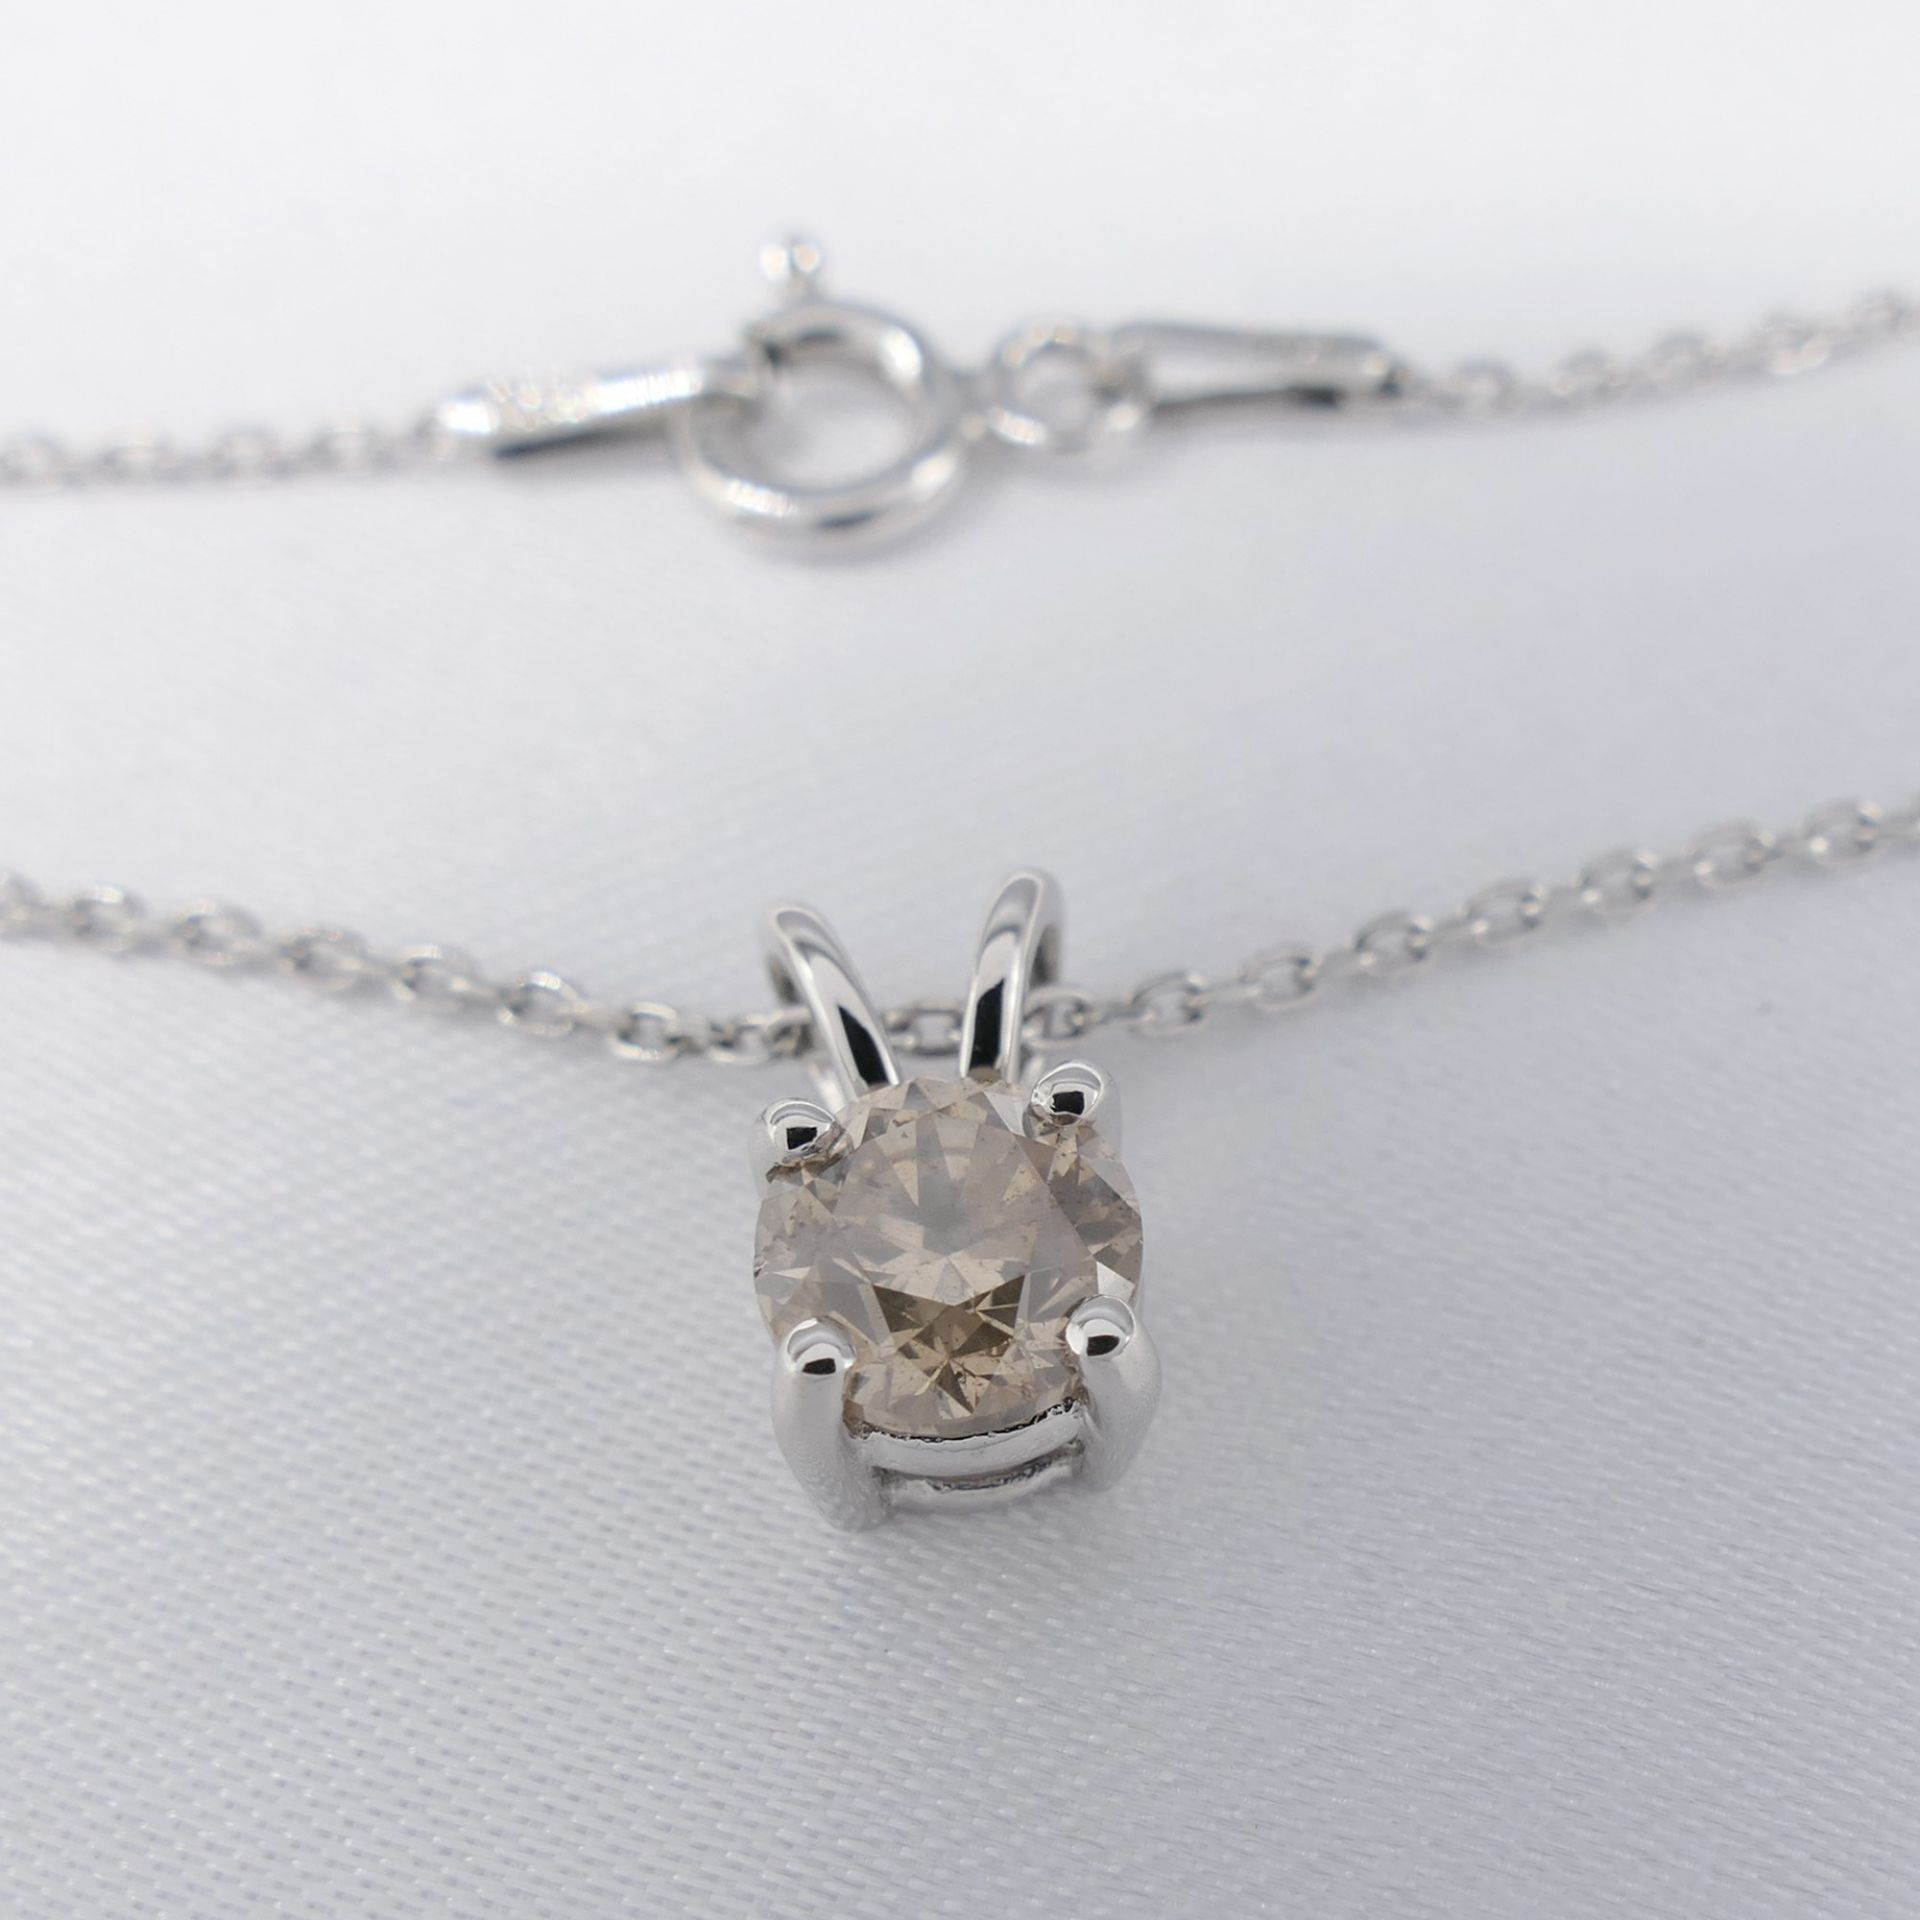 18ct White Gold 0.74 Carat Diamond Solitaire Pendant With Chain, Boxed - Image 4 of 7